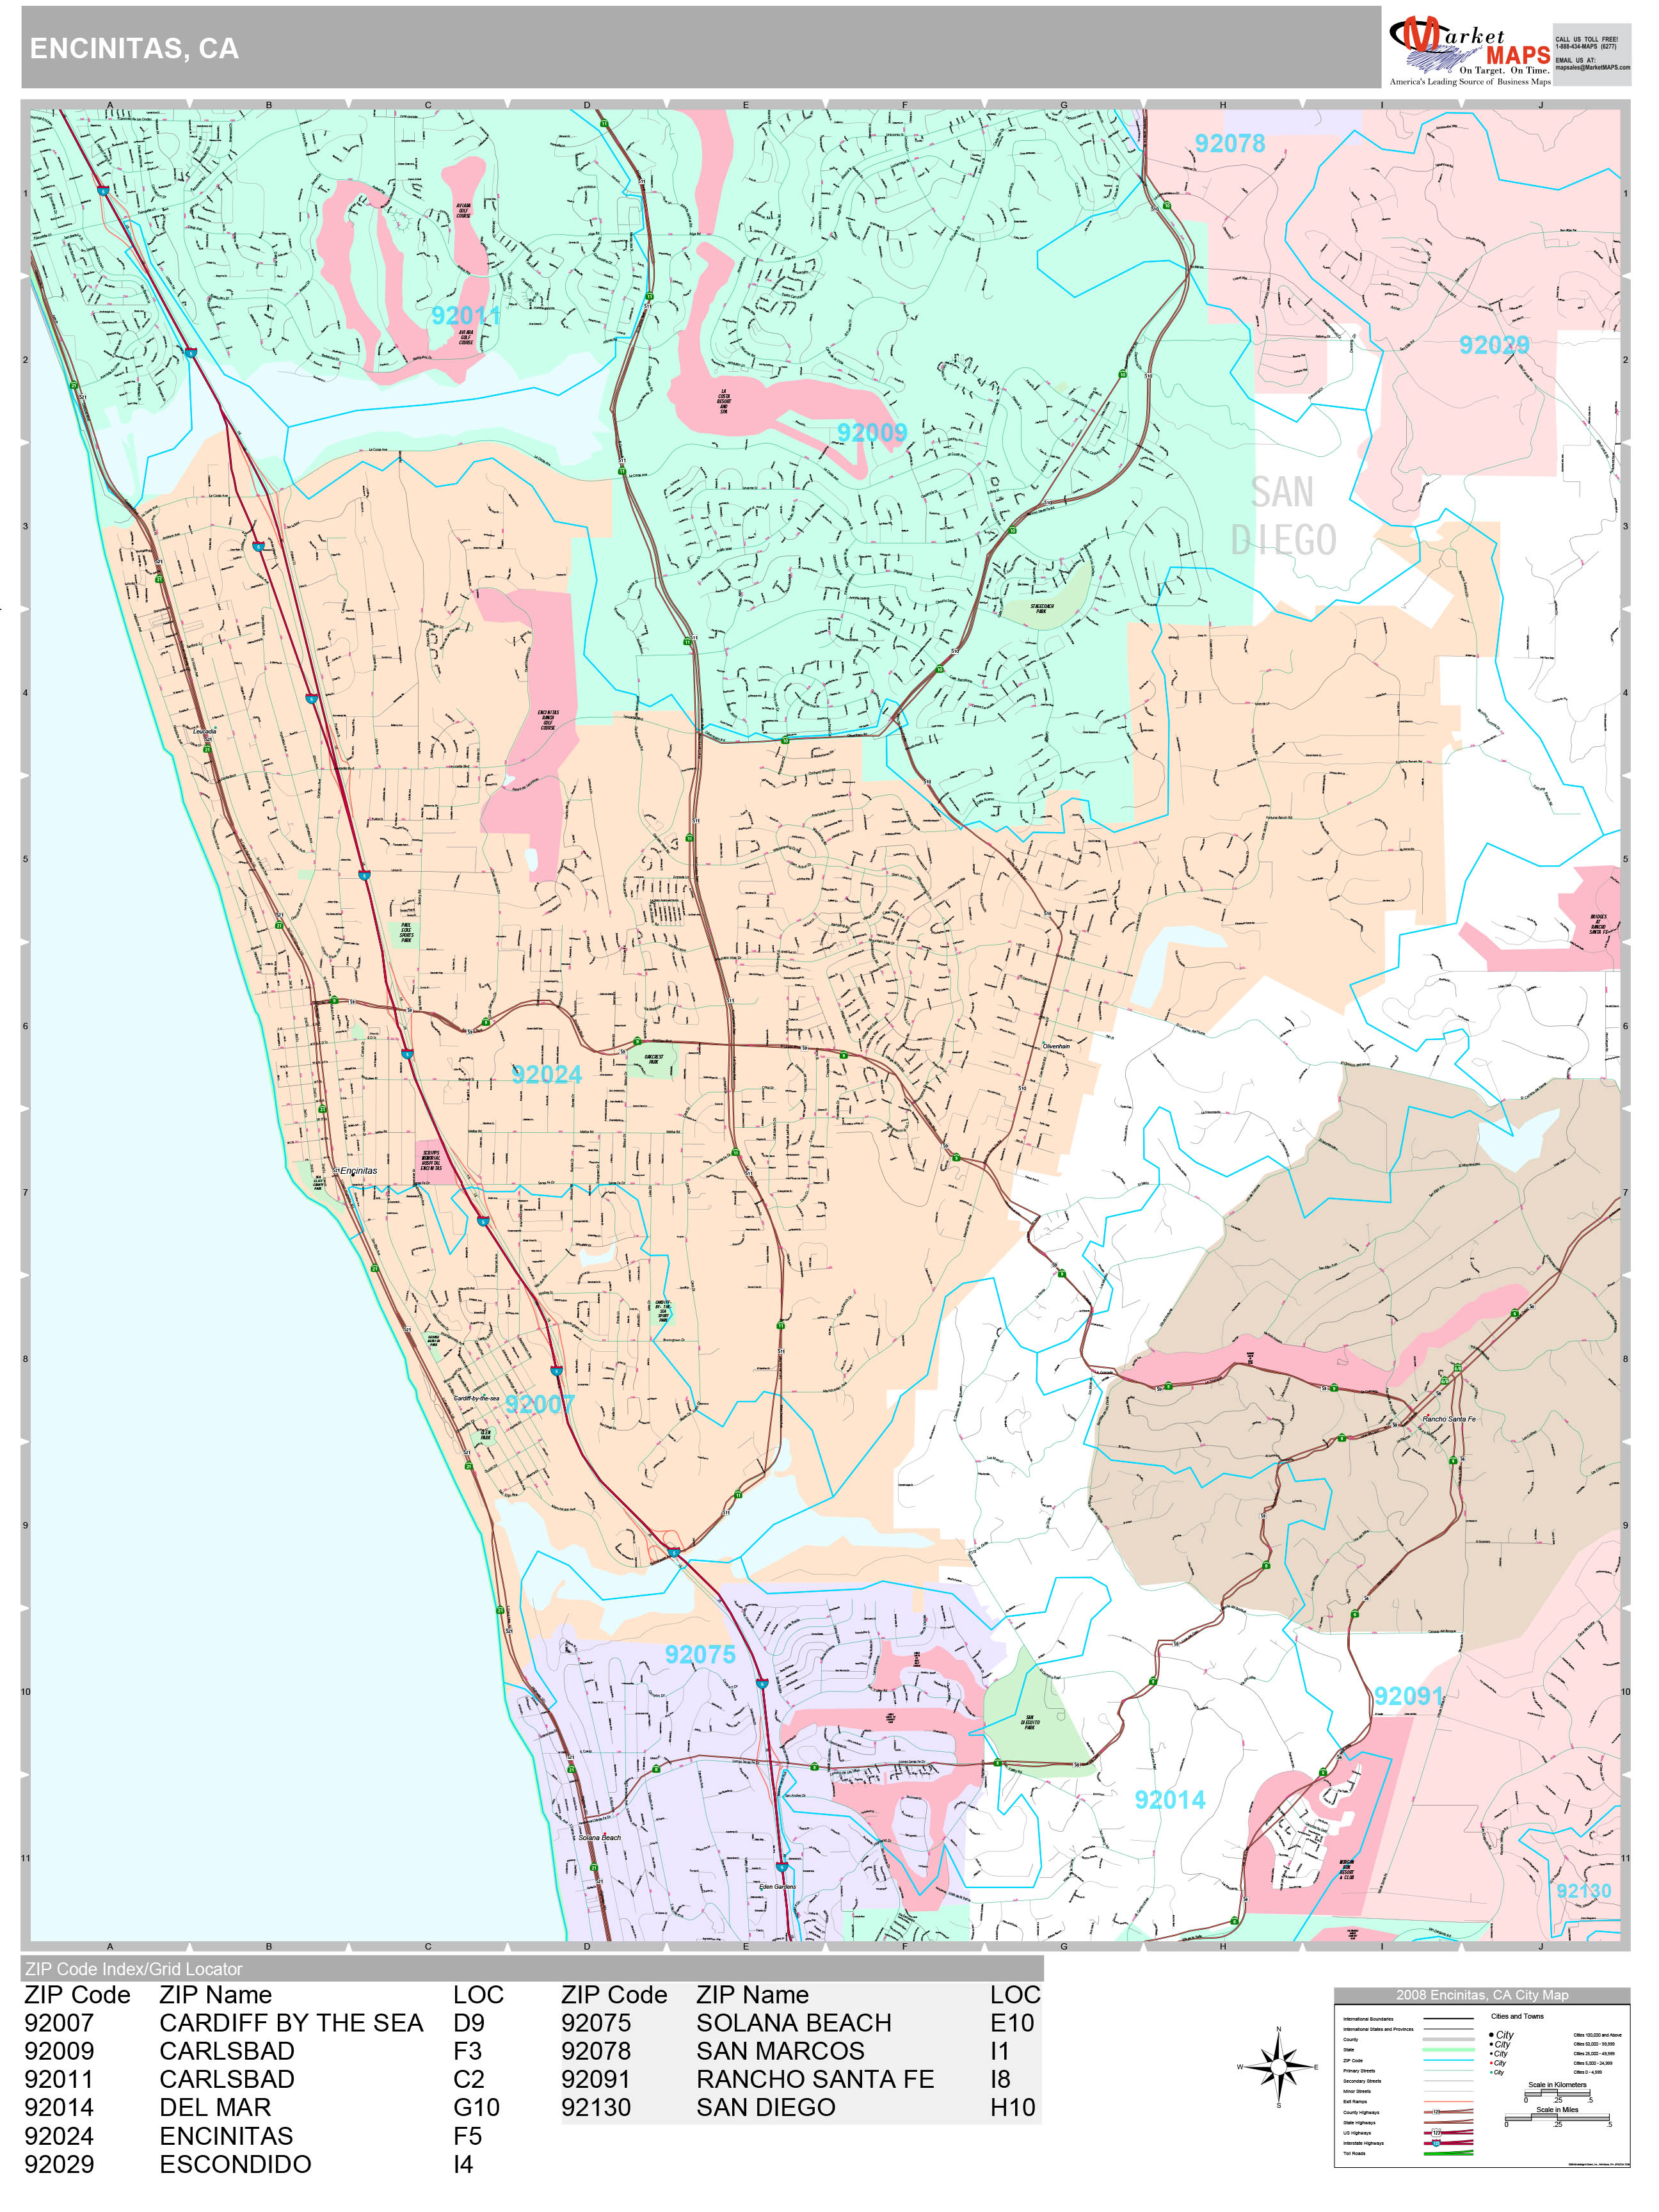 Encinitas California Wall Map Basic Style By Marketmaps | Images and ...